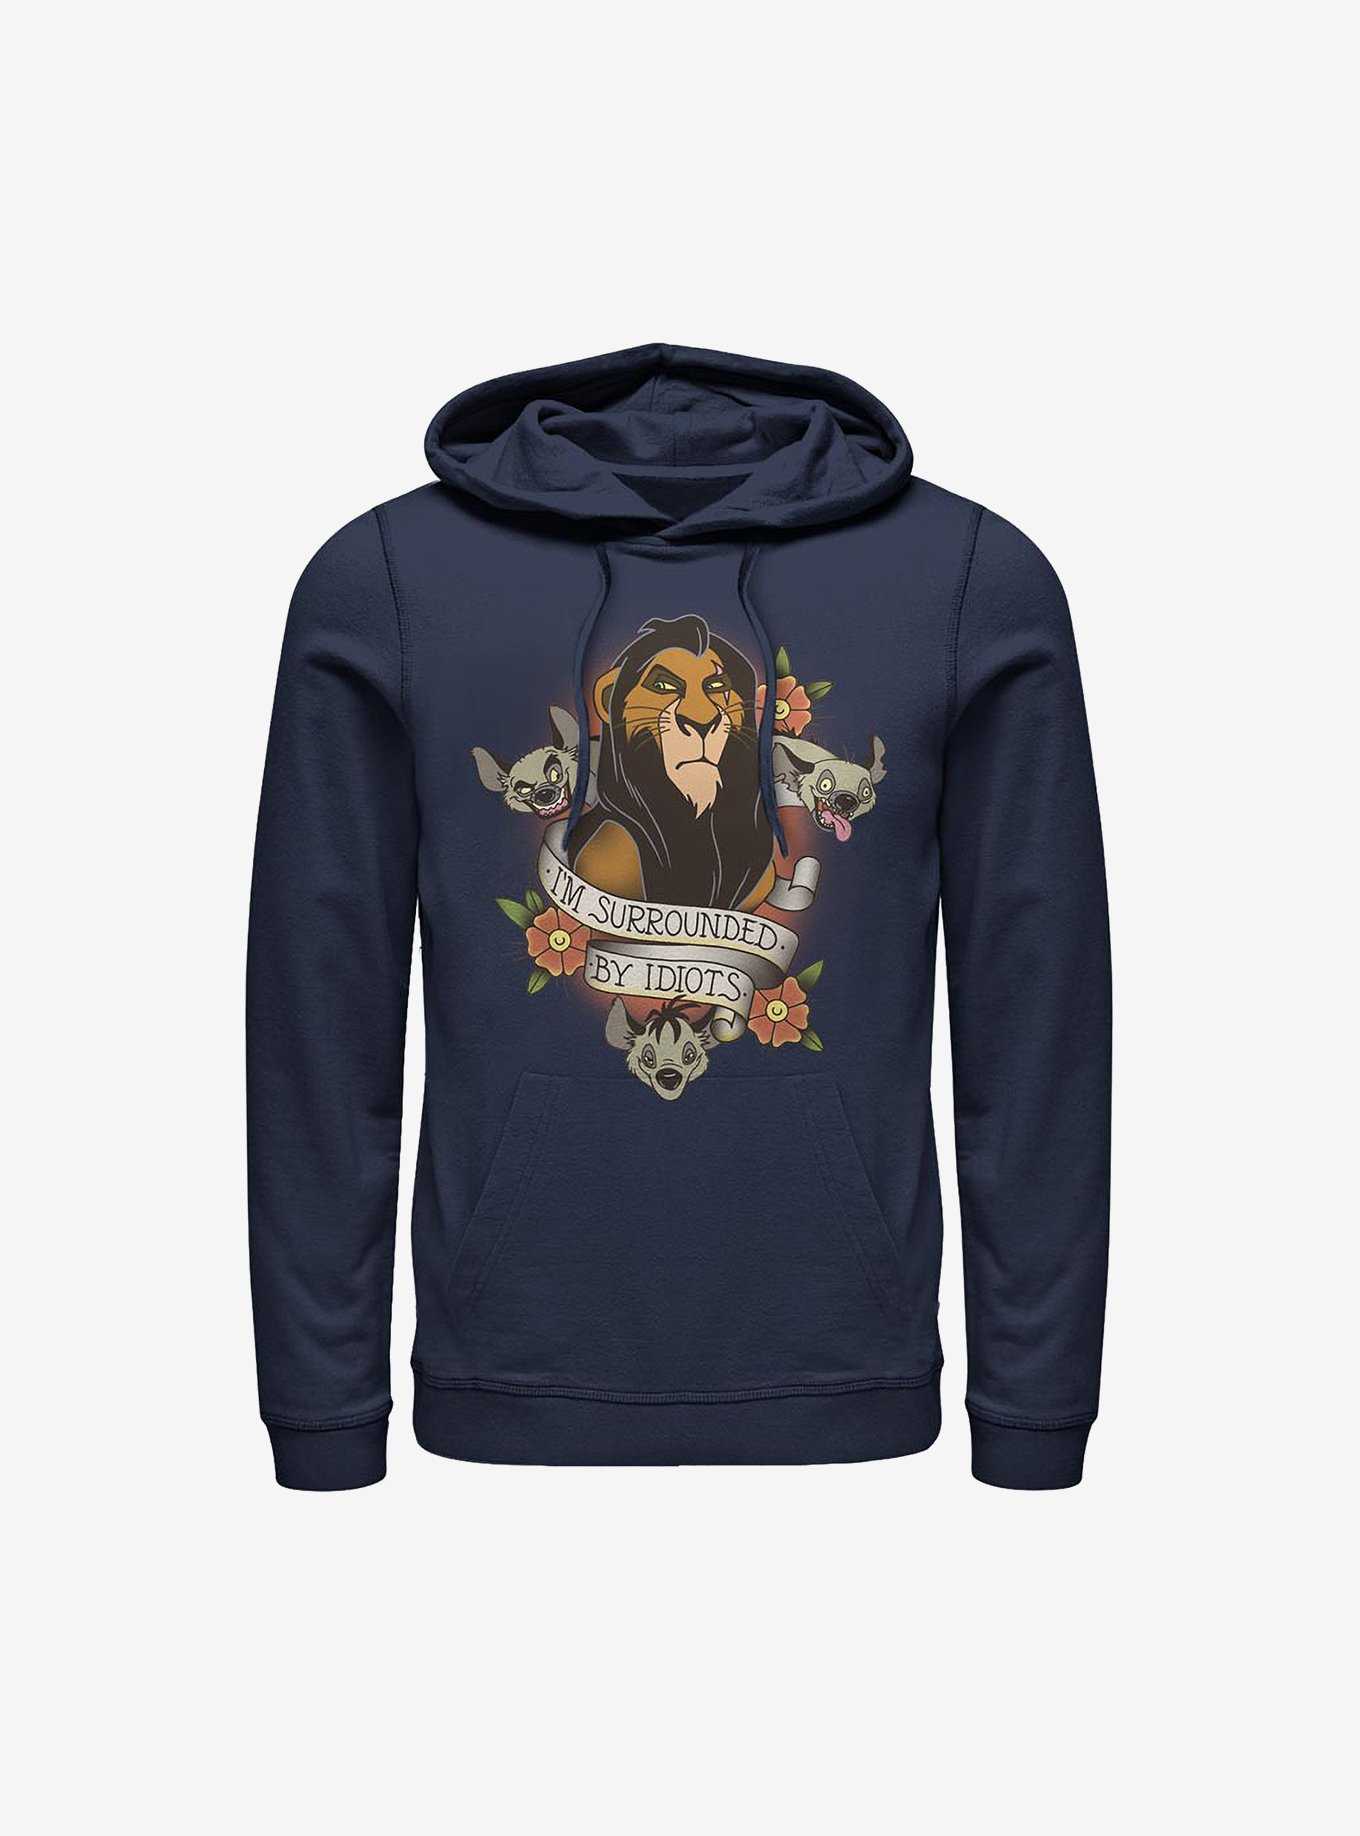 Disney The Lion King Surrounded Hoodie, , hi-res